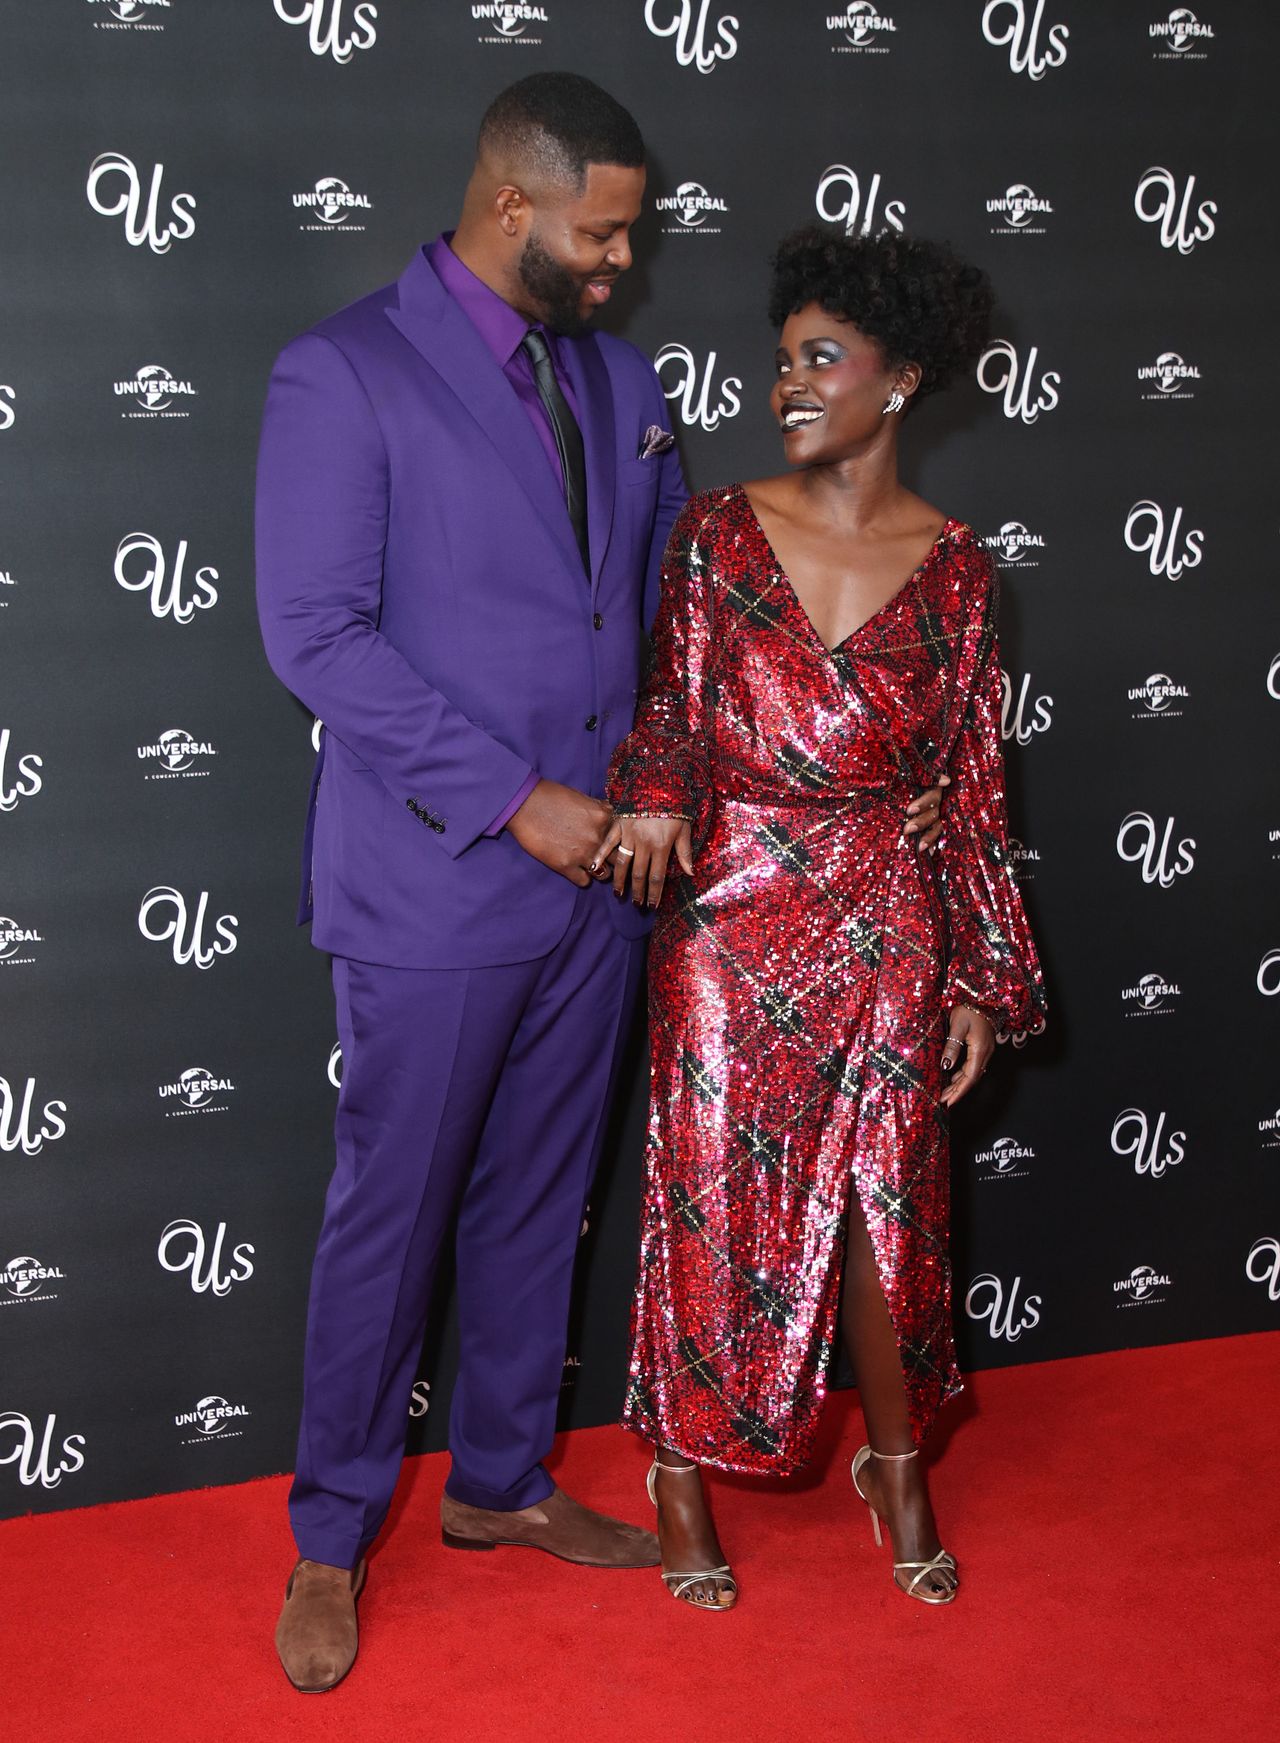 Winston with his Us and Black Panther co-star, Lupita Nyong'o